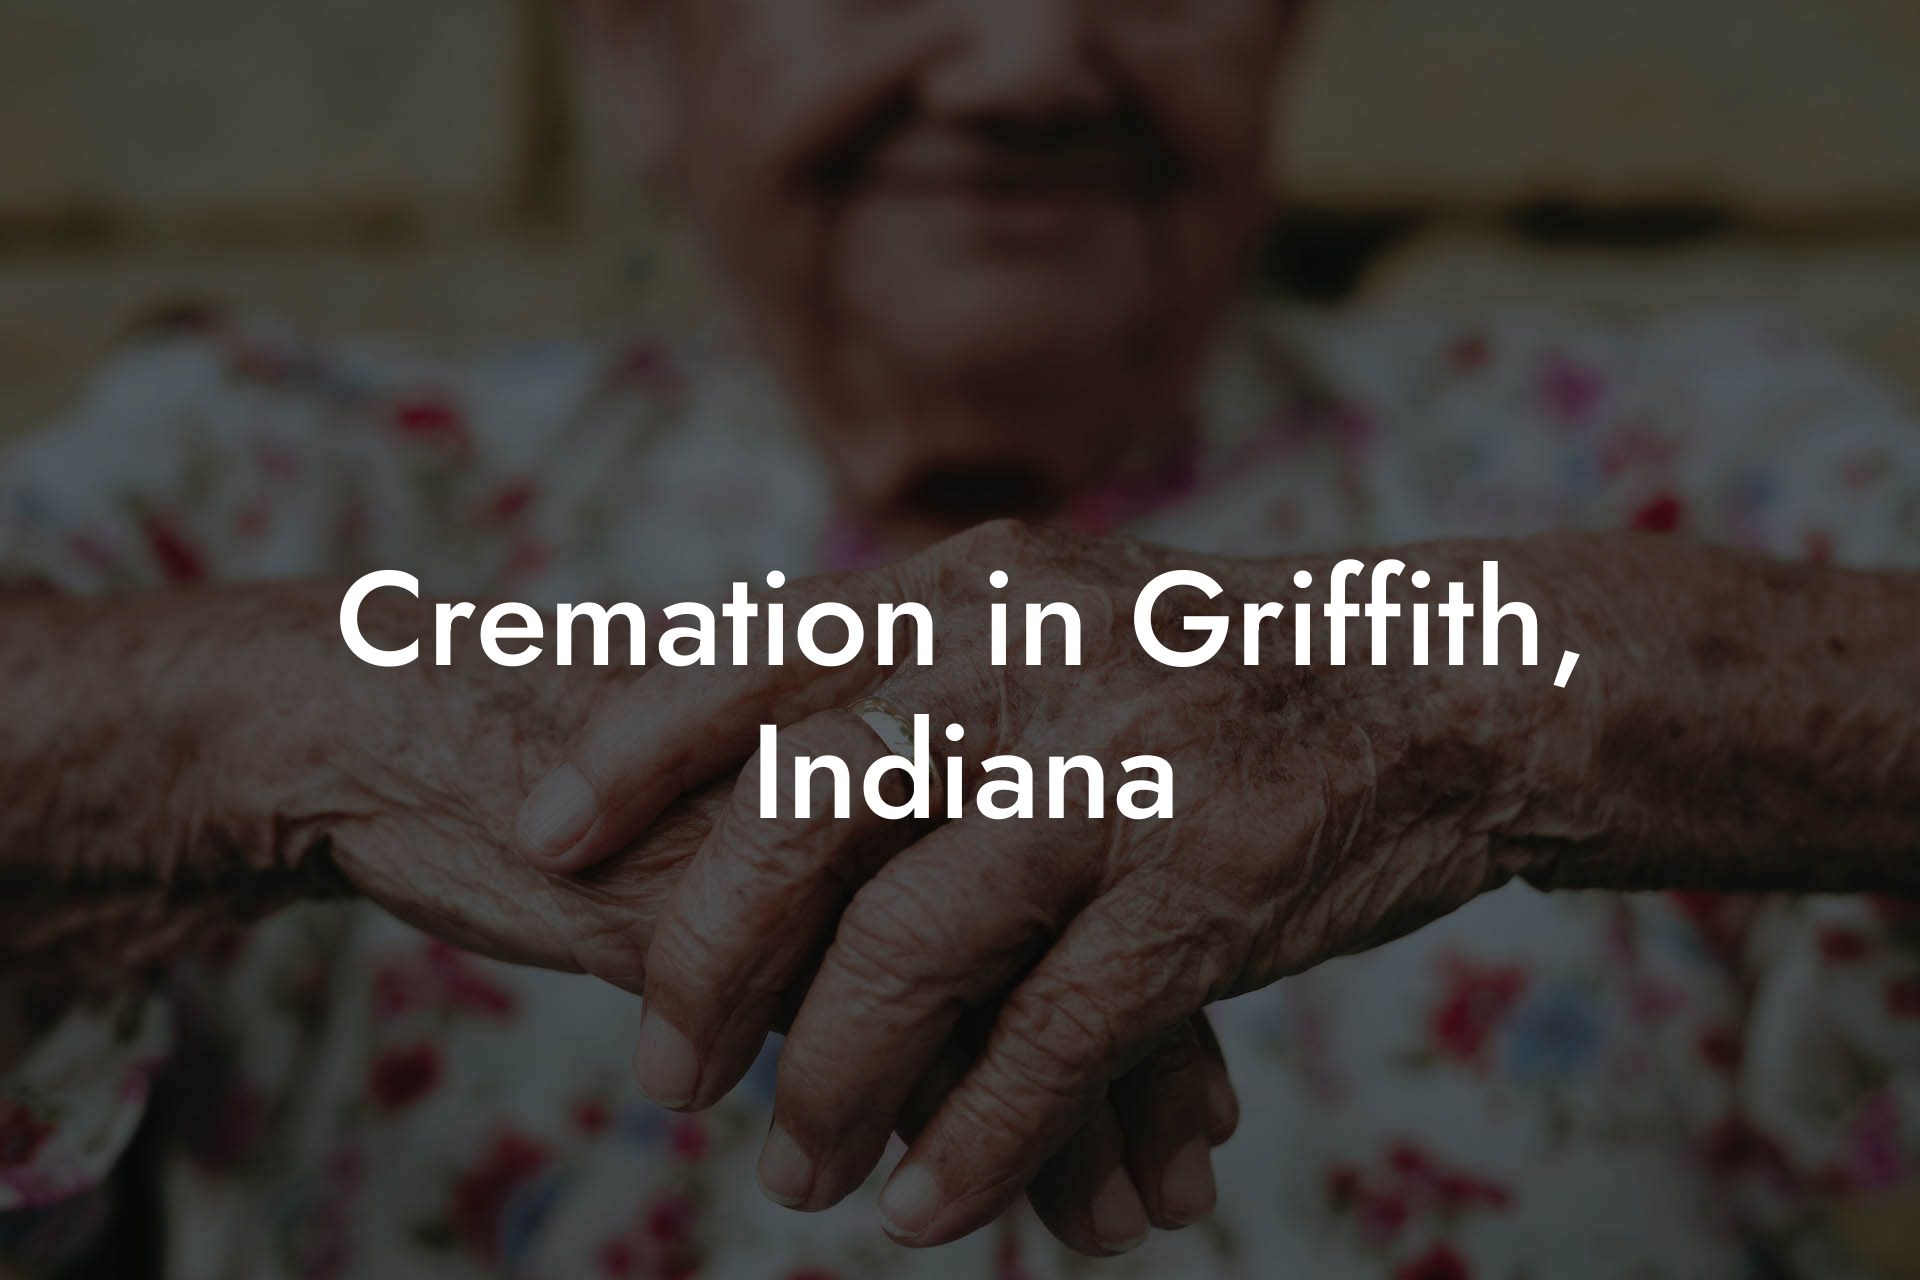 Cremation in Griffith, Indiana